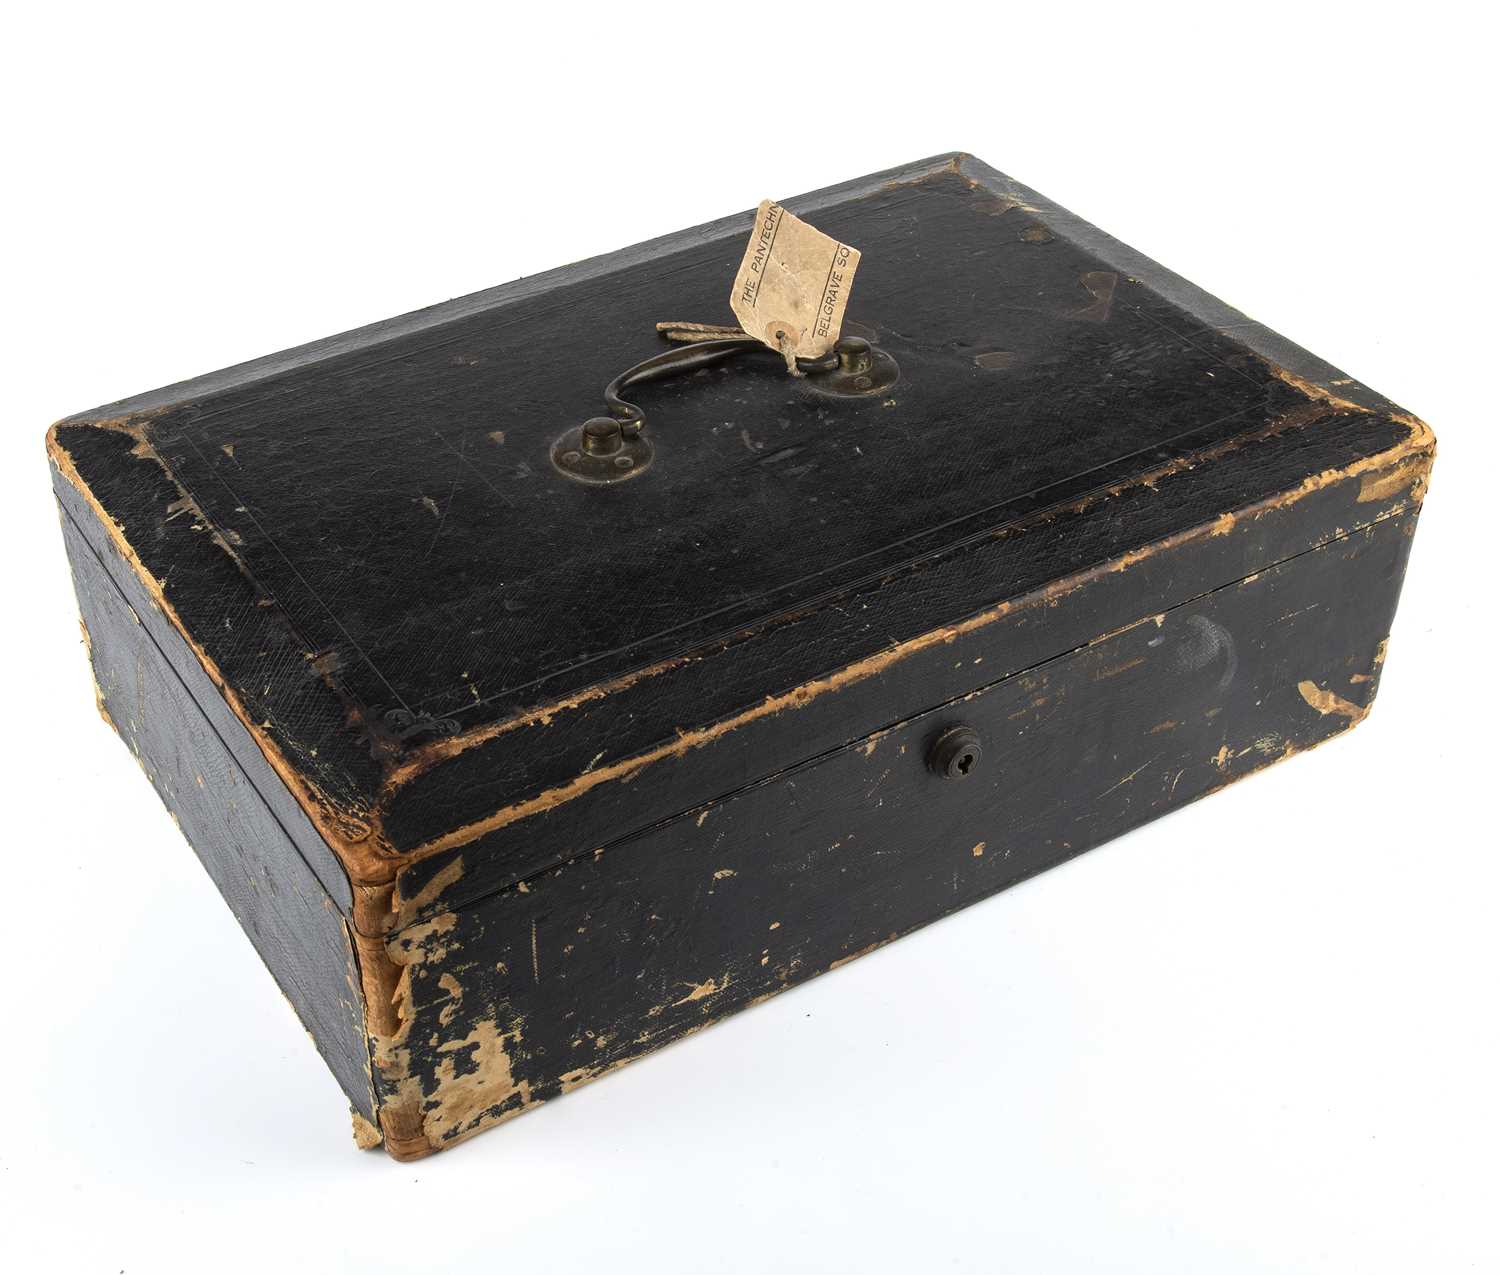 A mid 19th century black leather bound dispatch box with a brass swan neck carrying handle and a - Image 2 of 5